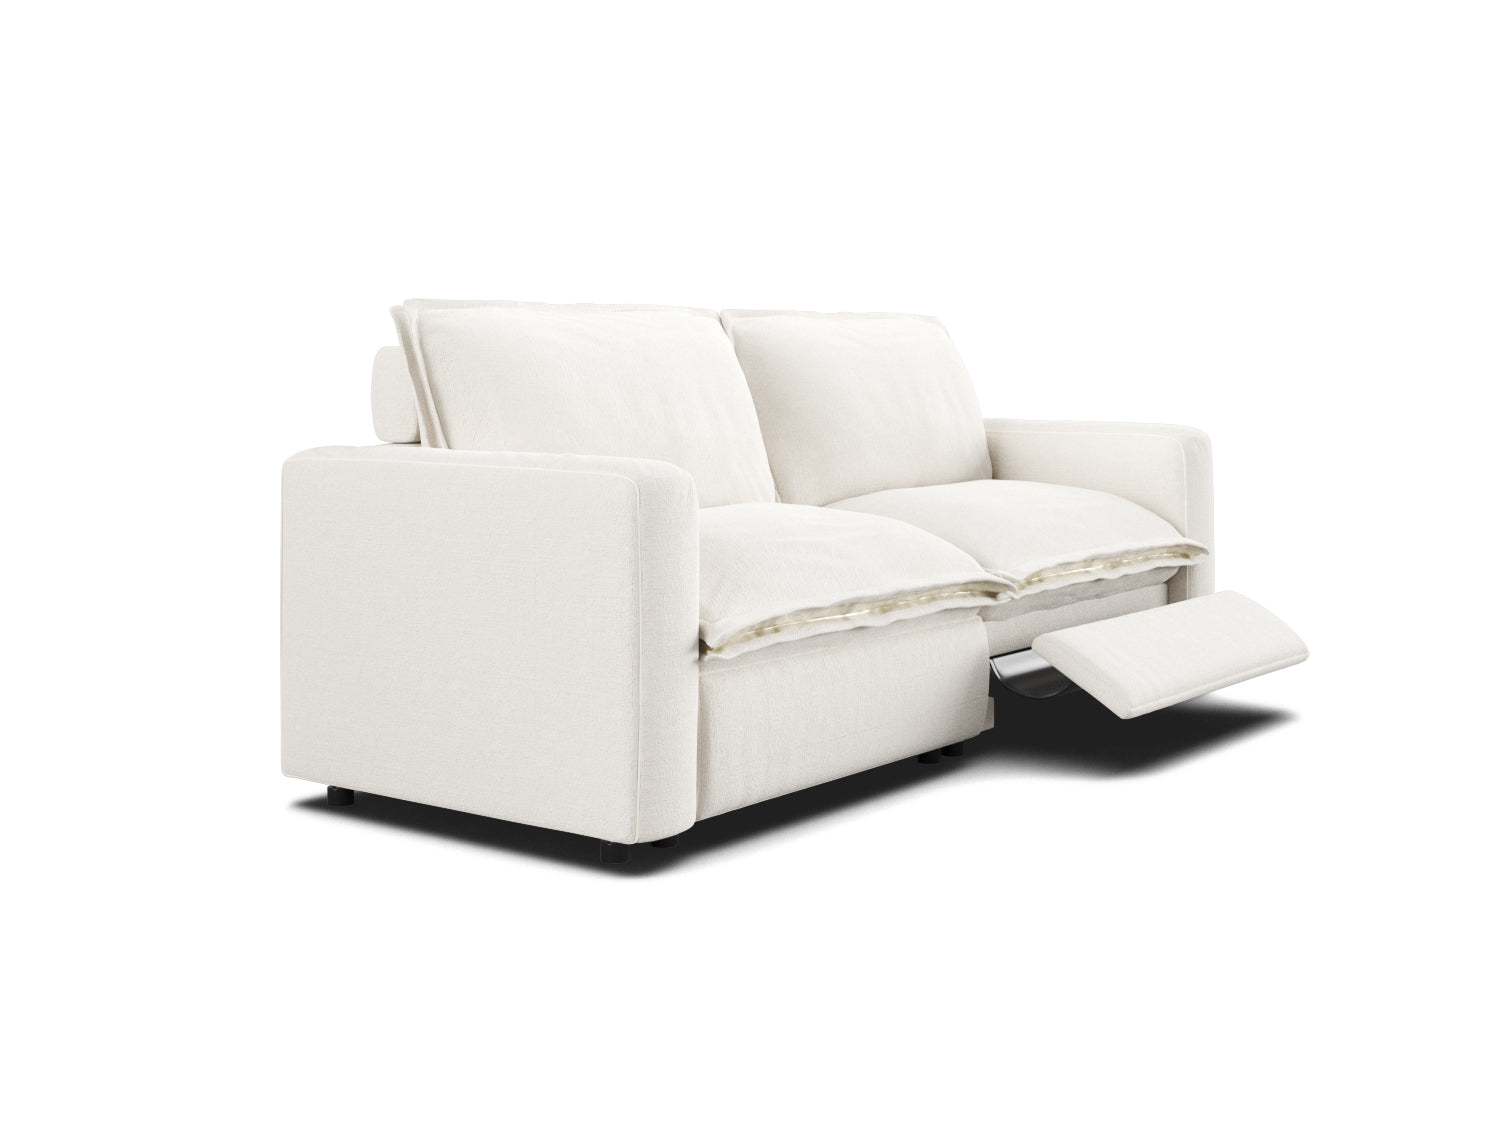 comfortable pushback recliner chair